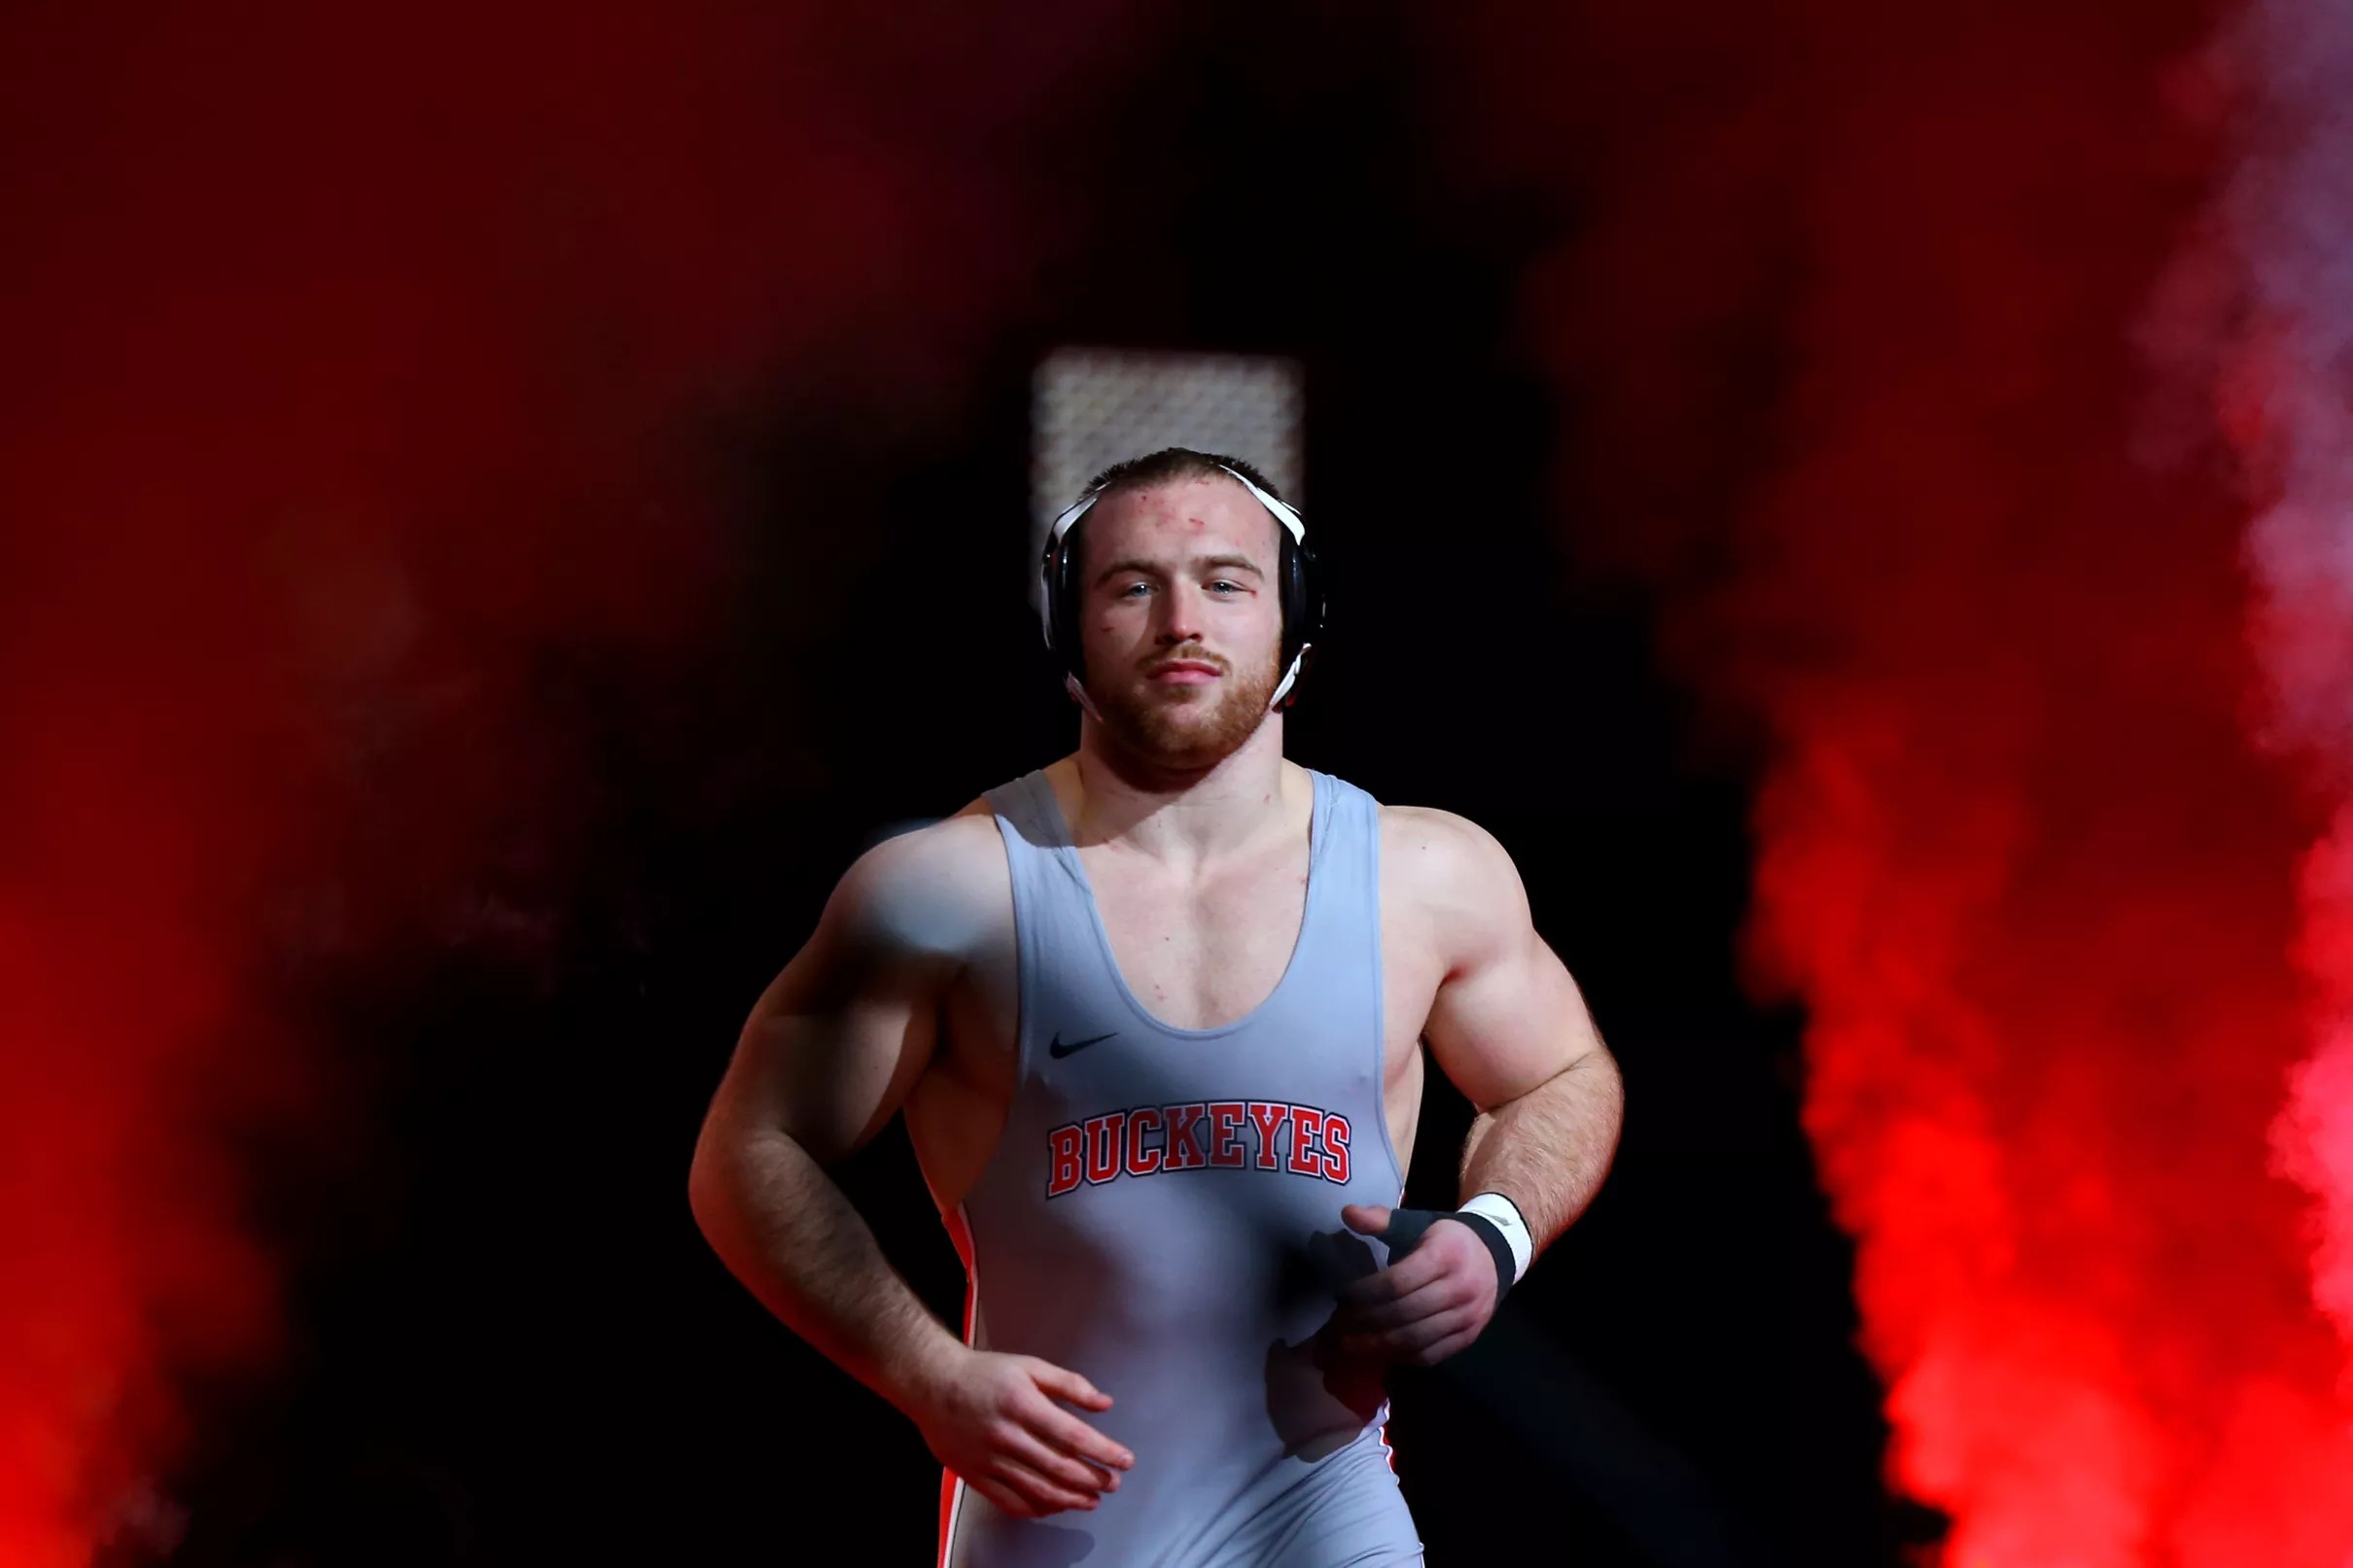 Ohio State wrestling’s Kyle Snyder named Big Ten Male Athlete of the